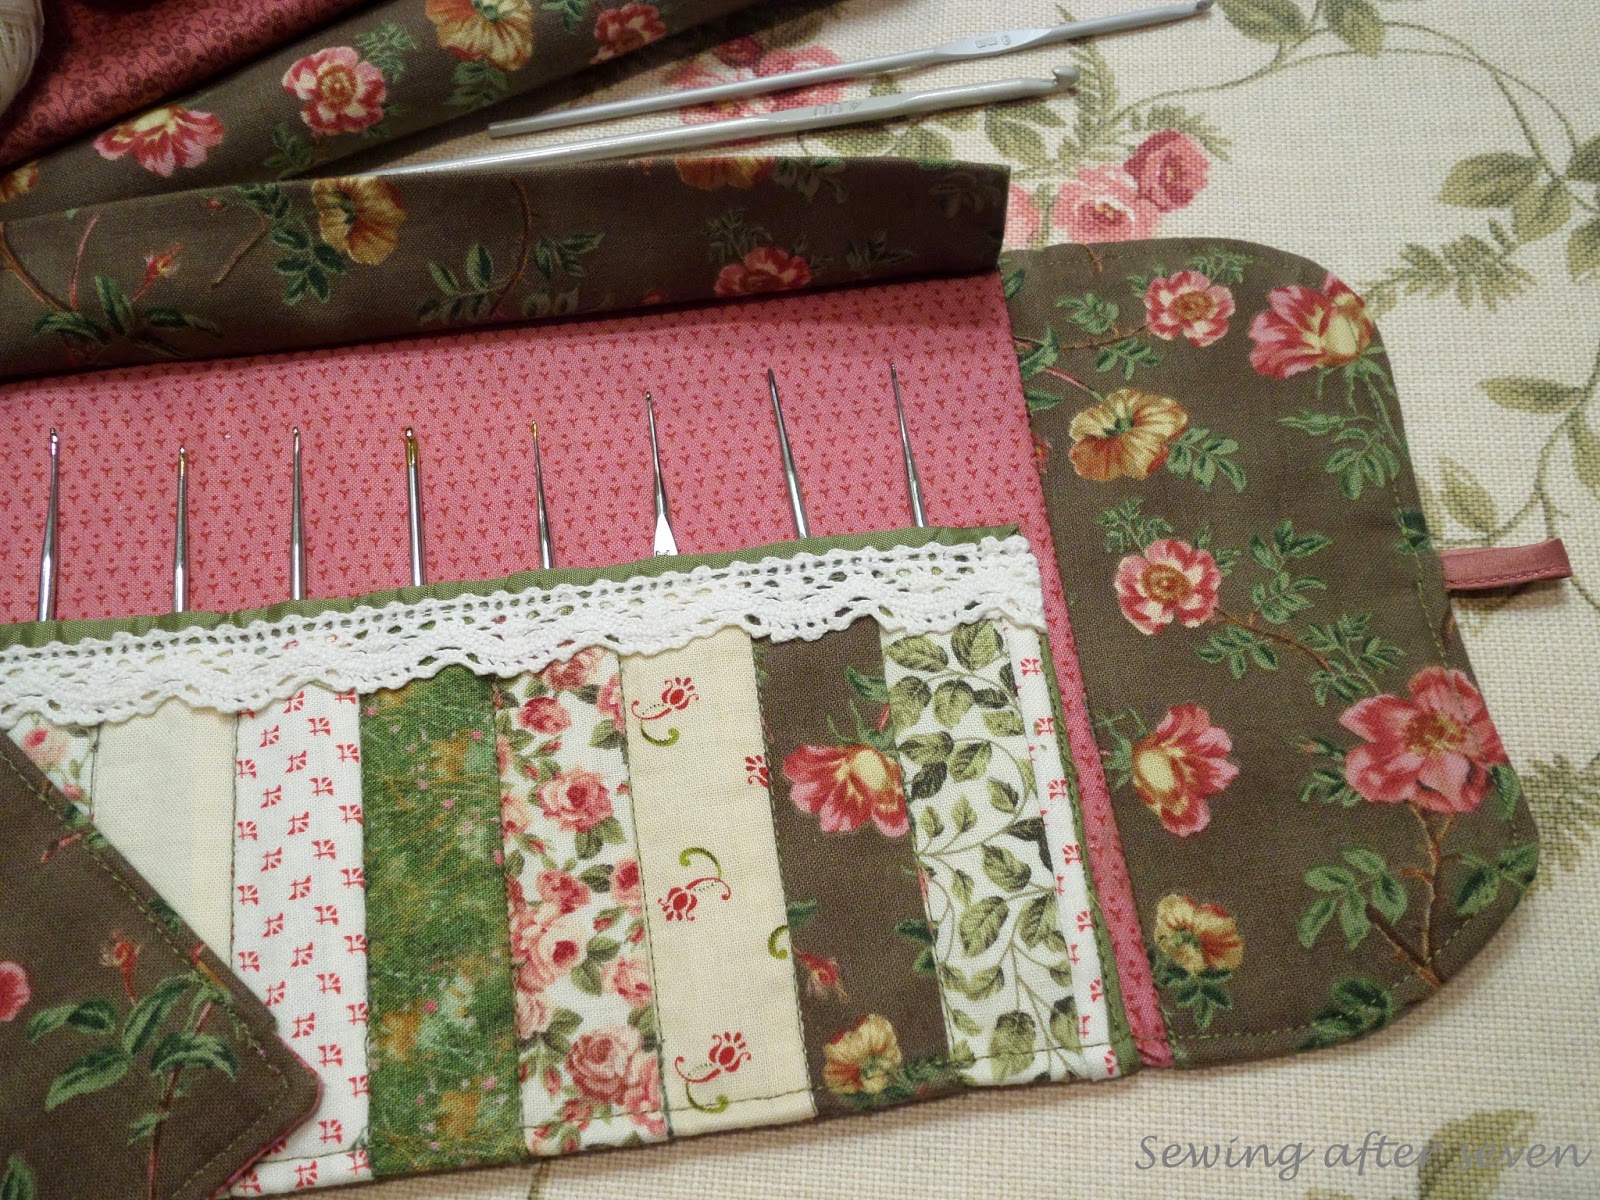 Sewing After Seven: Crochet hook case and Giveaway winner